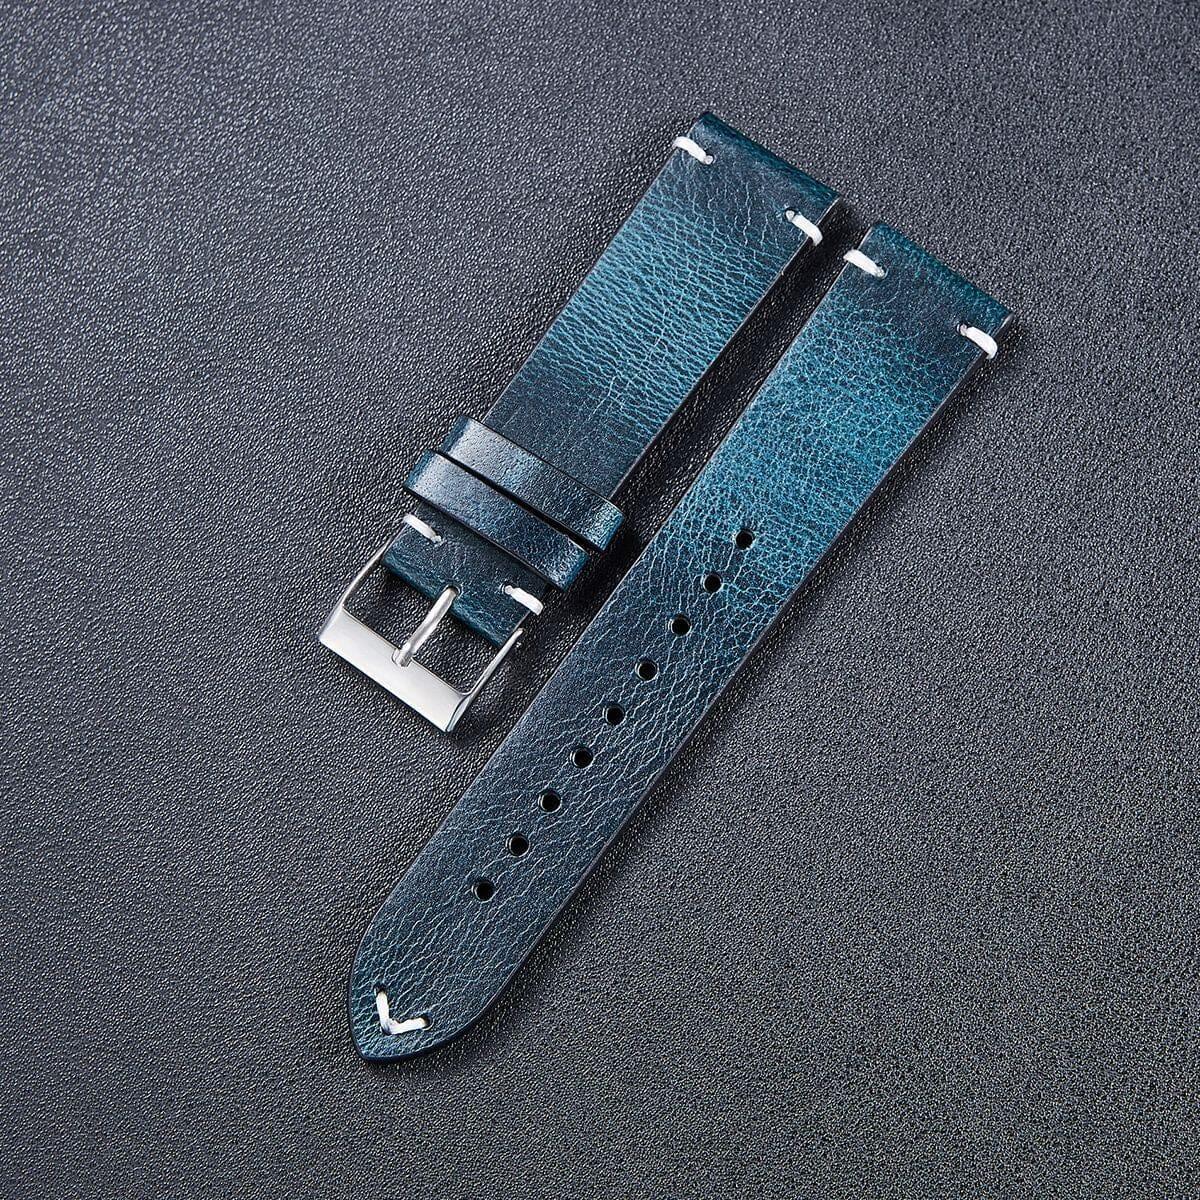 Vintage Oiled Leather Watch Straps Compatible with the Withings Activite - Pop, Steel & Sapphire